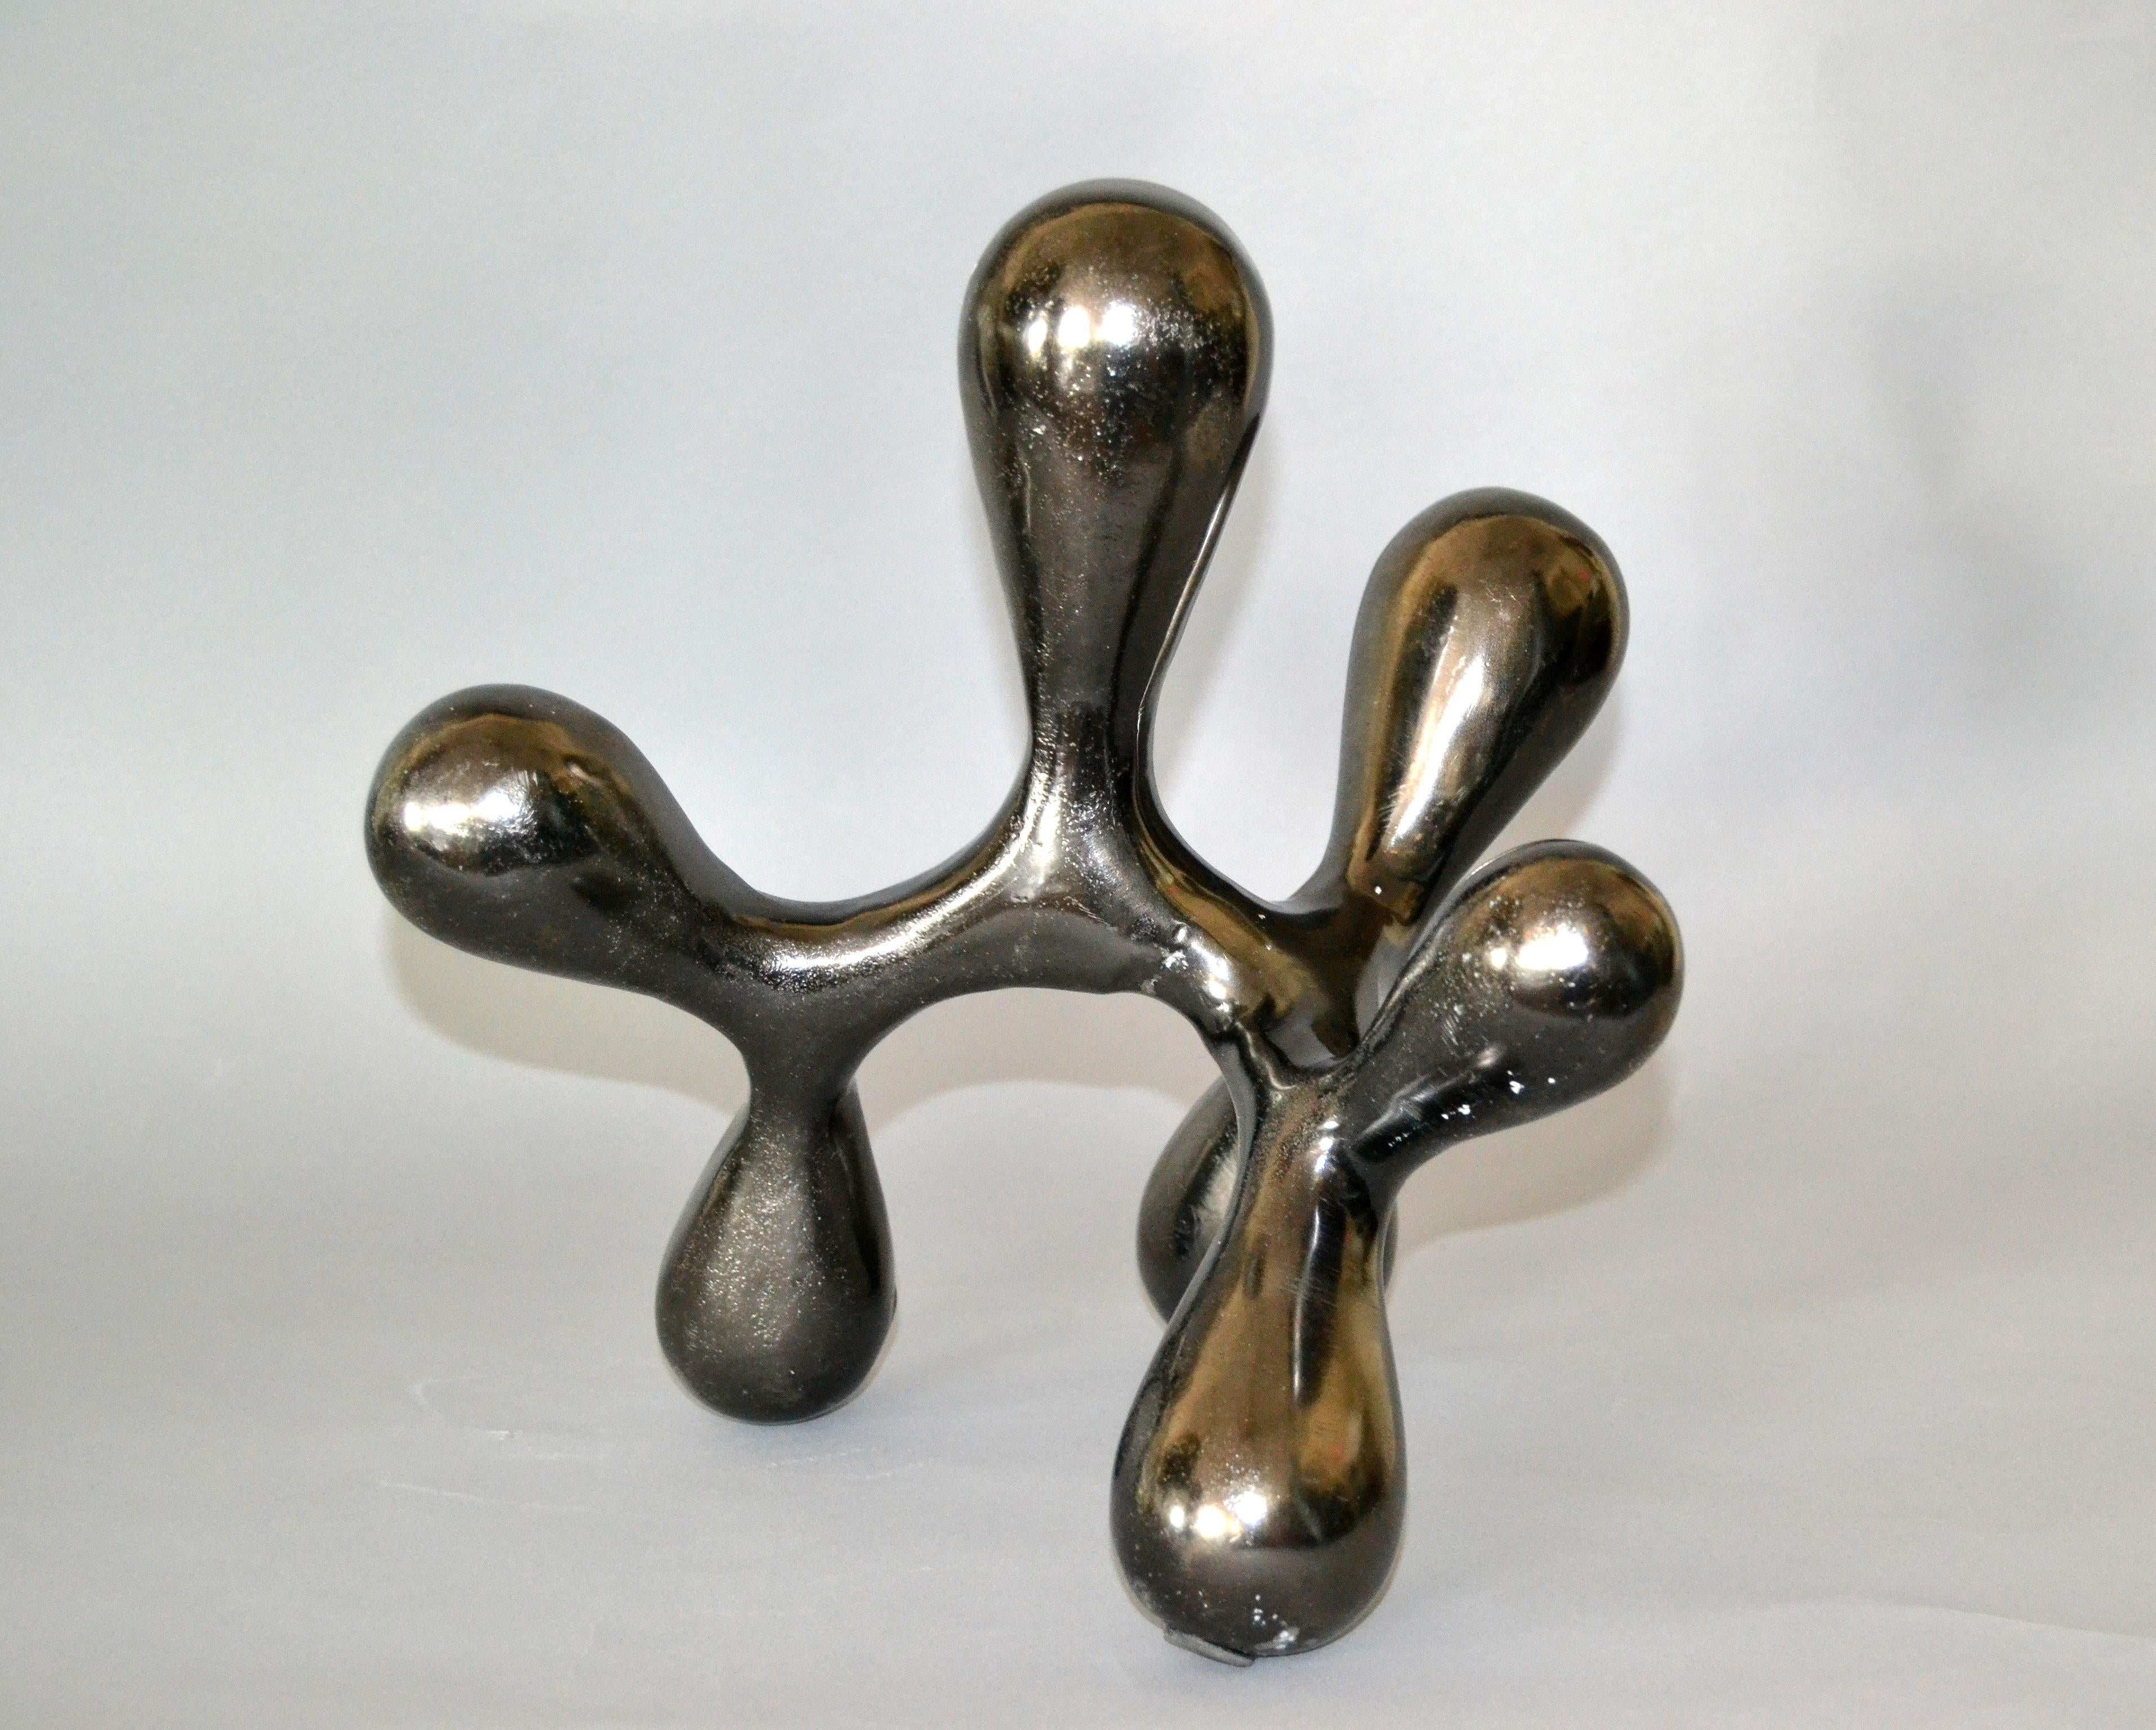 Biomorphic Shape in Abstract Art Bronze Table Sculpture 6